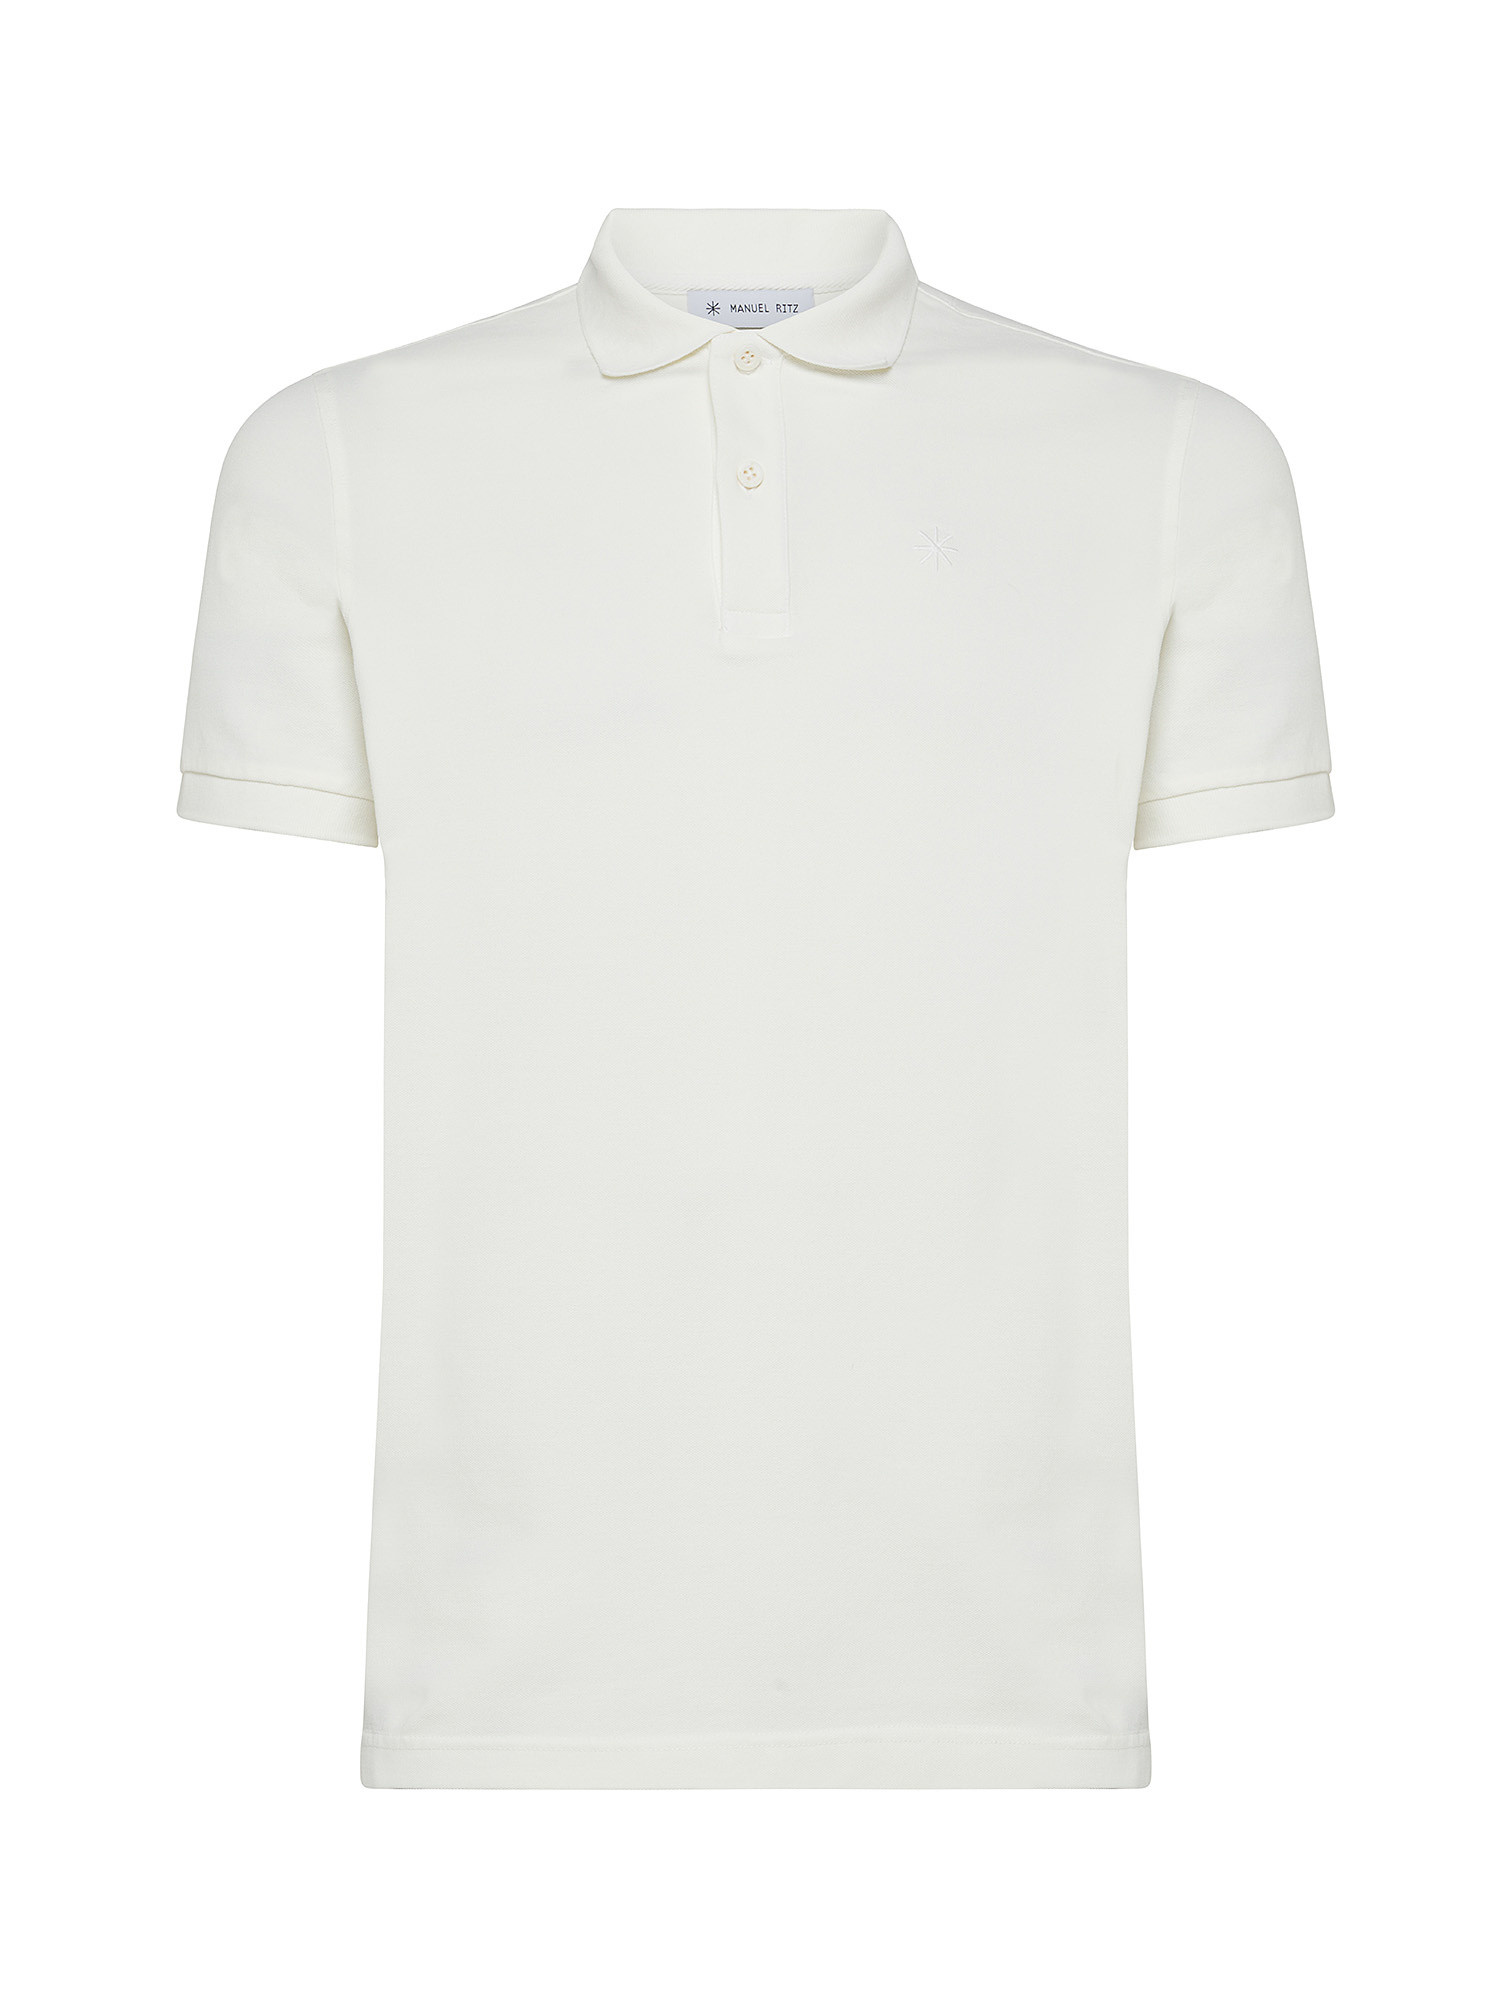 Manuel Ritz - Garment-dyed polo shirt in stretch cotton with logo, White, large image number 0